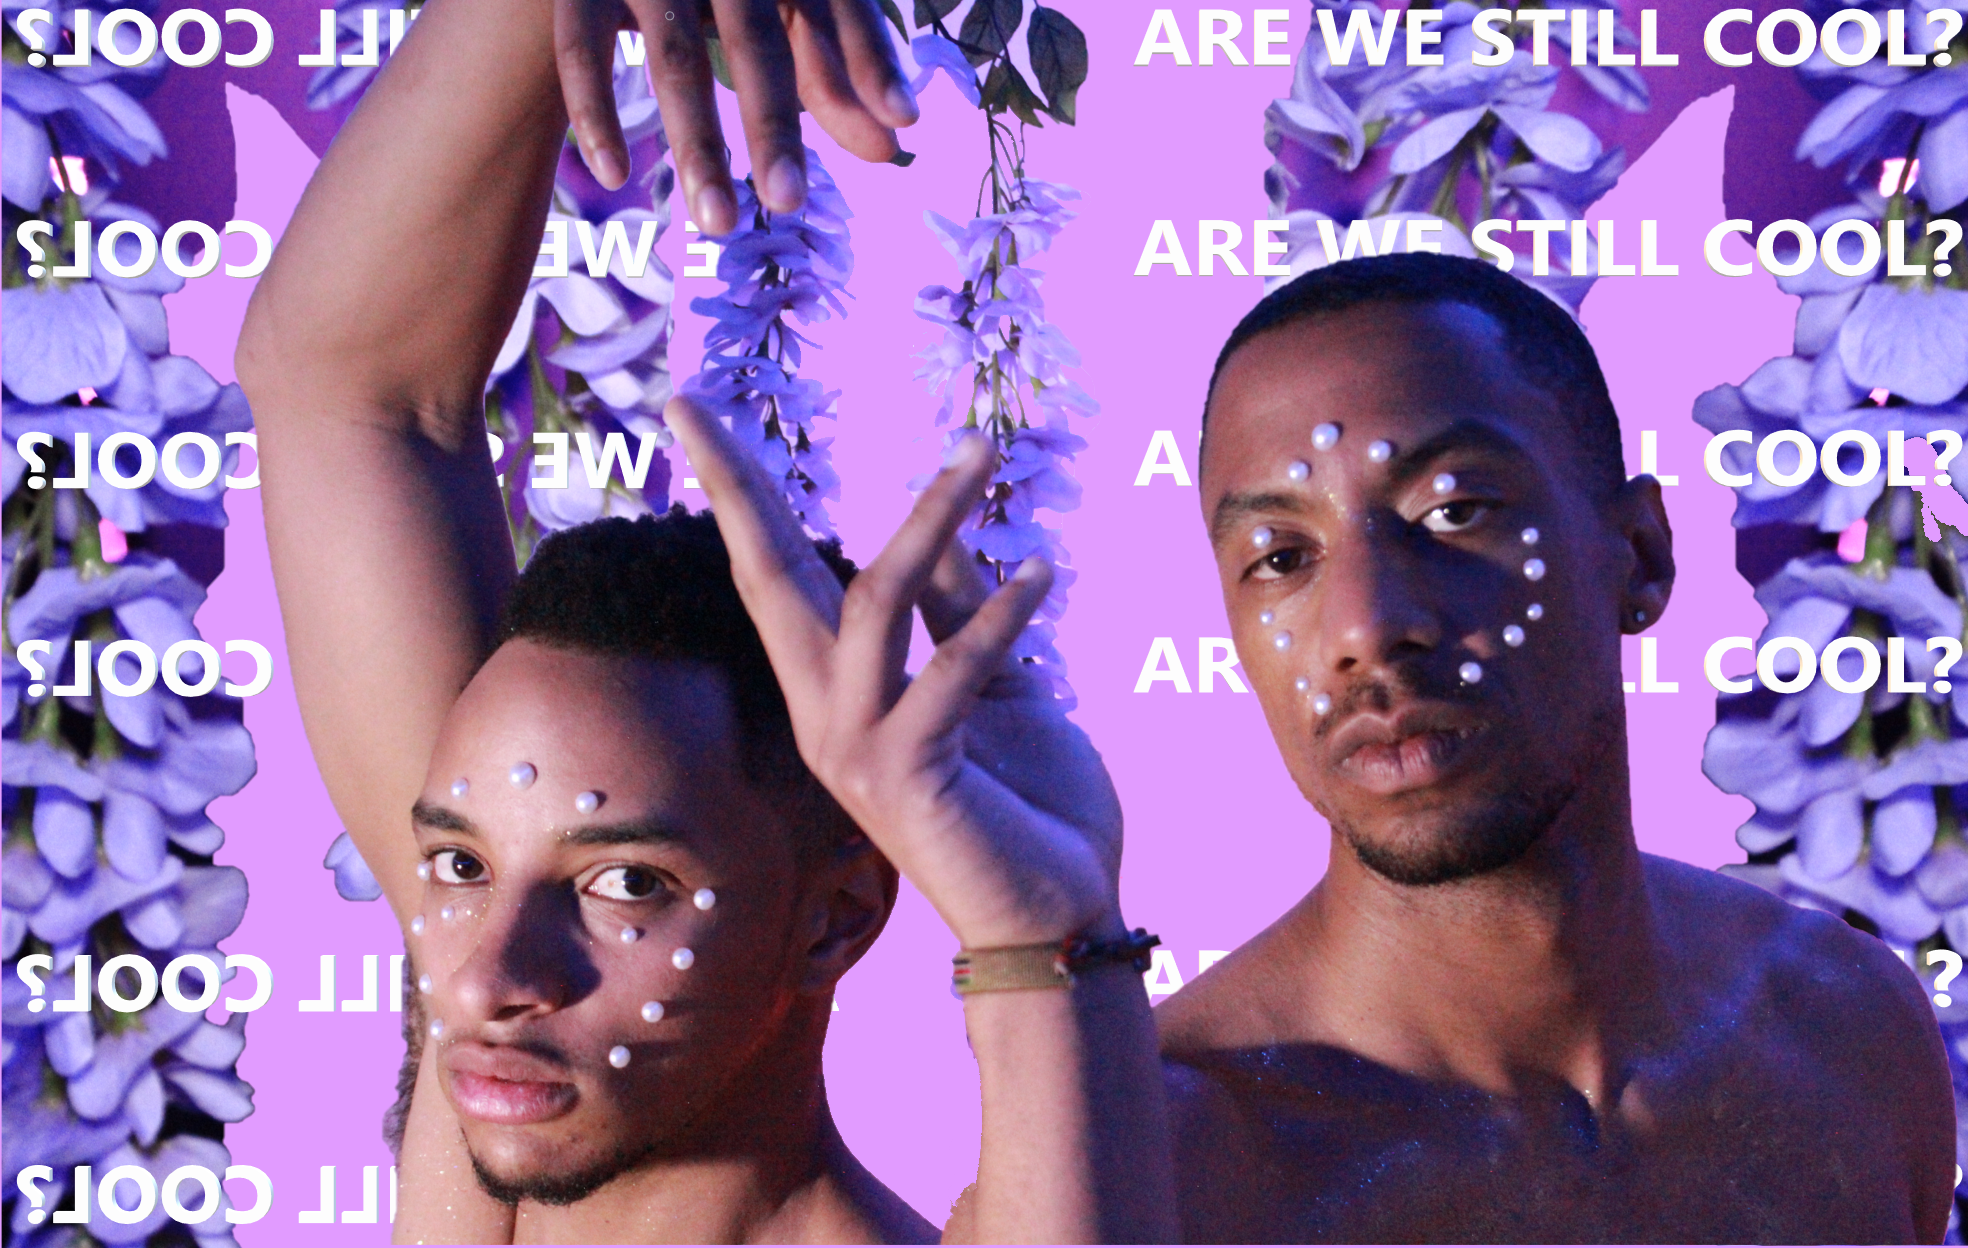 A collage of two men, with no shirts on and pearls on their faces, gazing into the camera with a soft and contemplative look on their faces. They are collaged onto a purple background with purple flowers, and text that reads, “Are we still cool?”